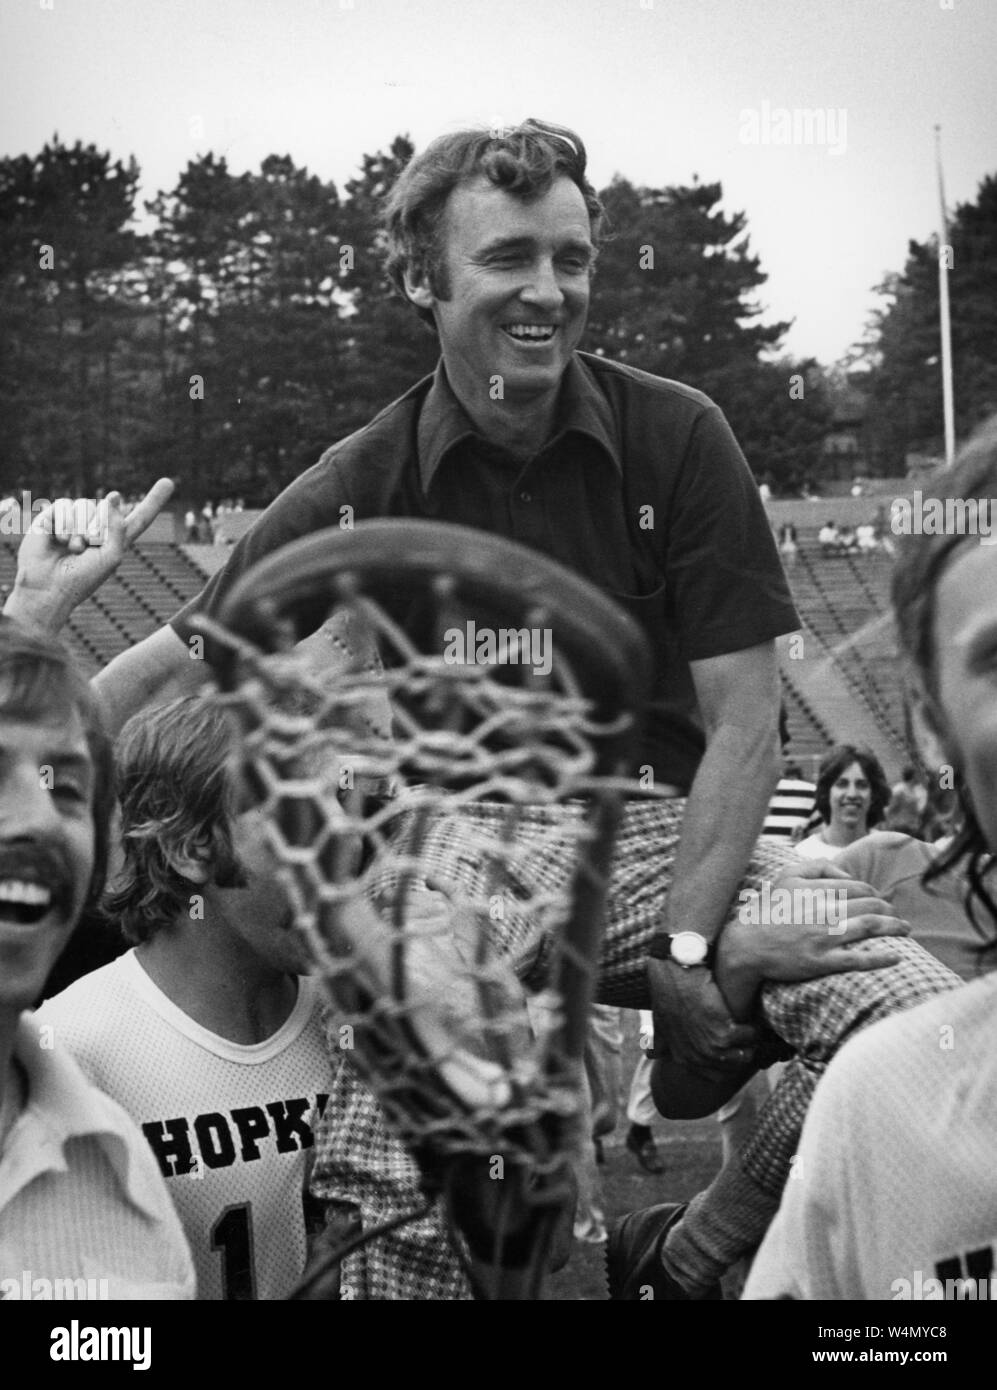 Johns Hopkins University Hall of Fame lacrosse coach Bob Scott smiles as he rests on the shoulders of players on his lacrosse team in celebration at Johns Hopkins University, Baltimore, Maryland, 1976. From the Historical Photographs Collection. () Stock Photo